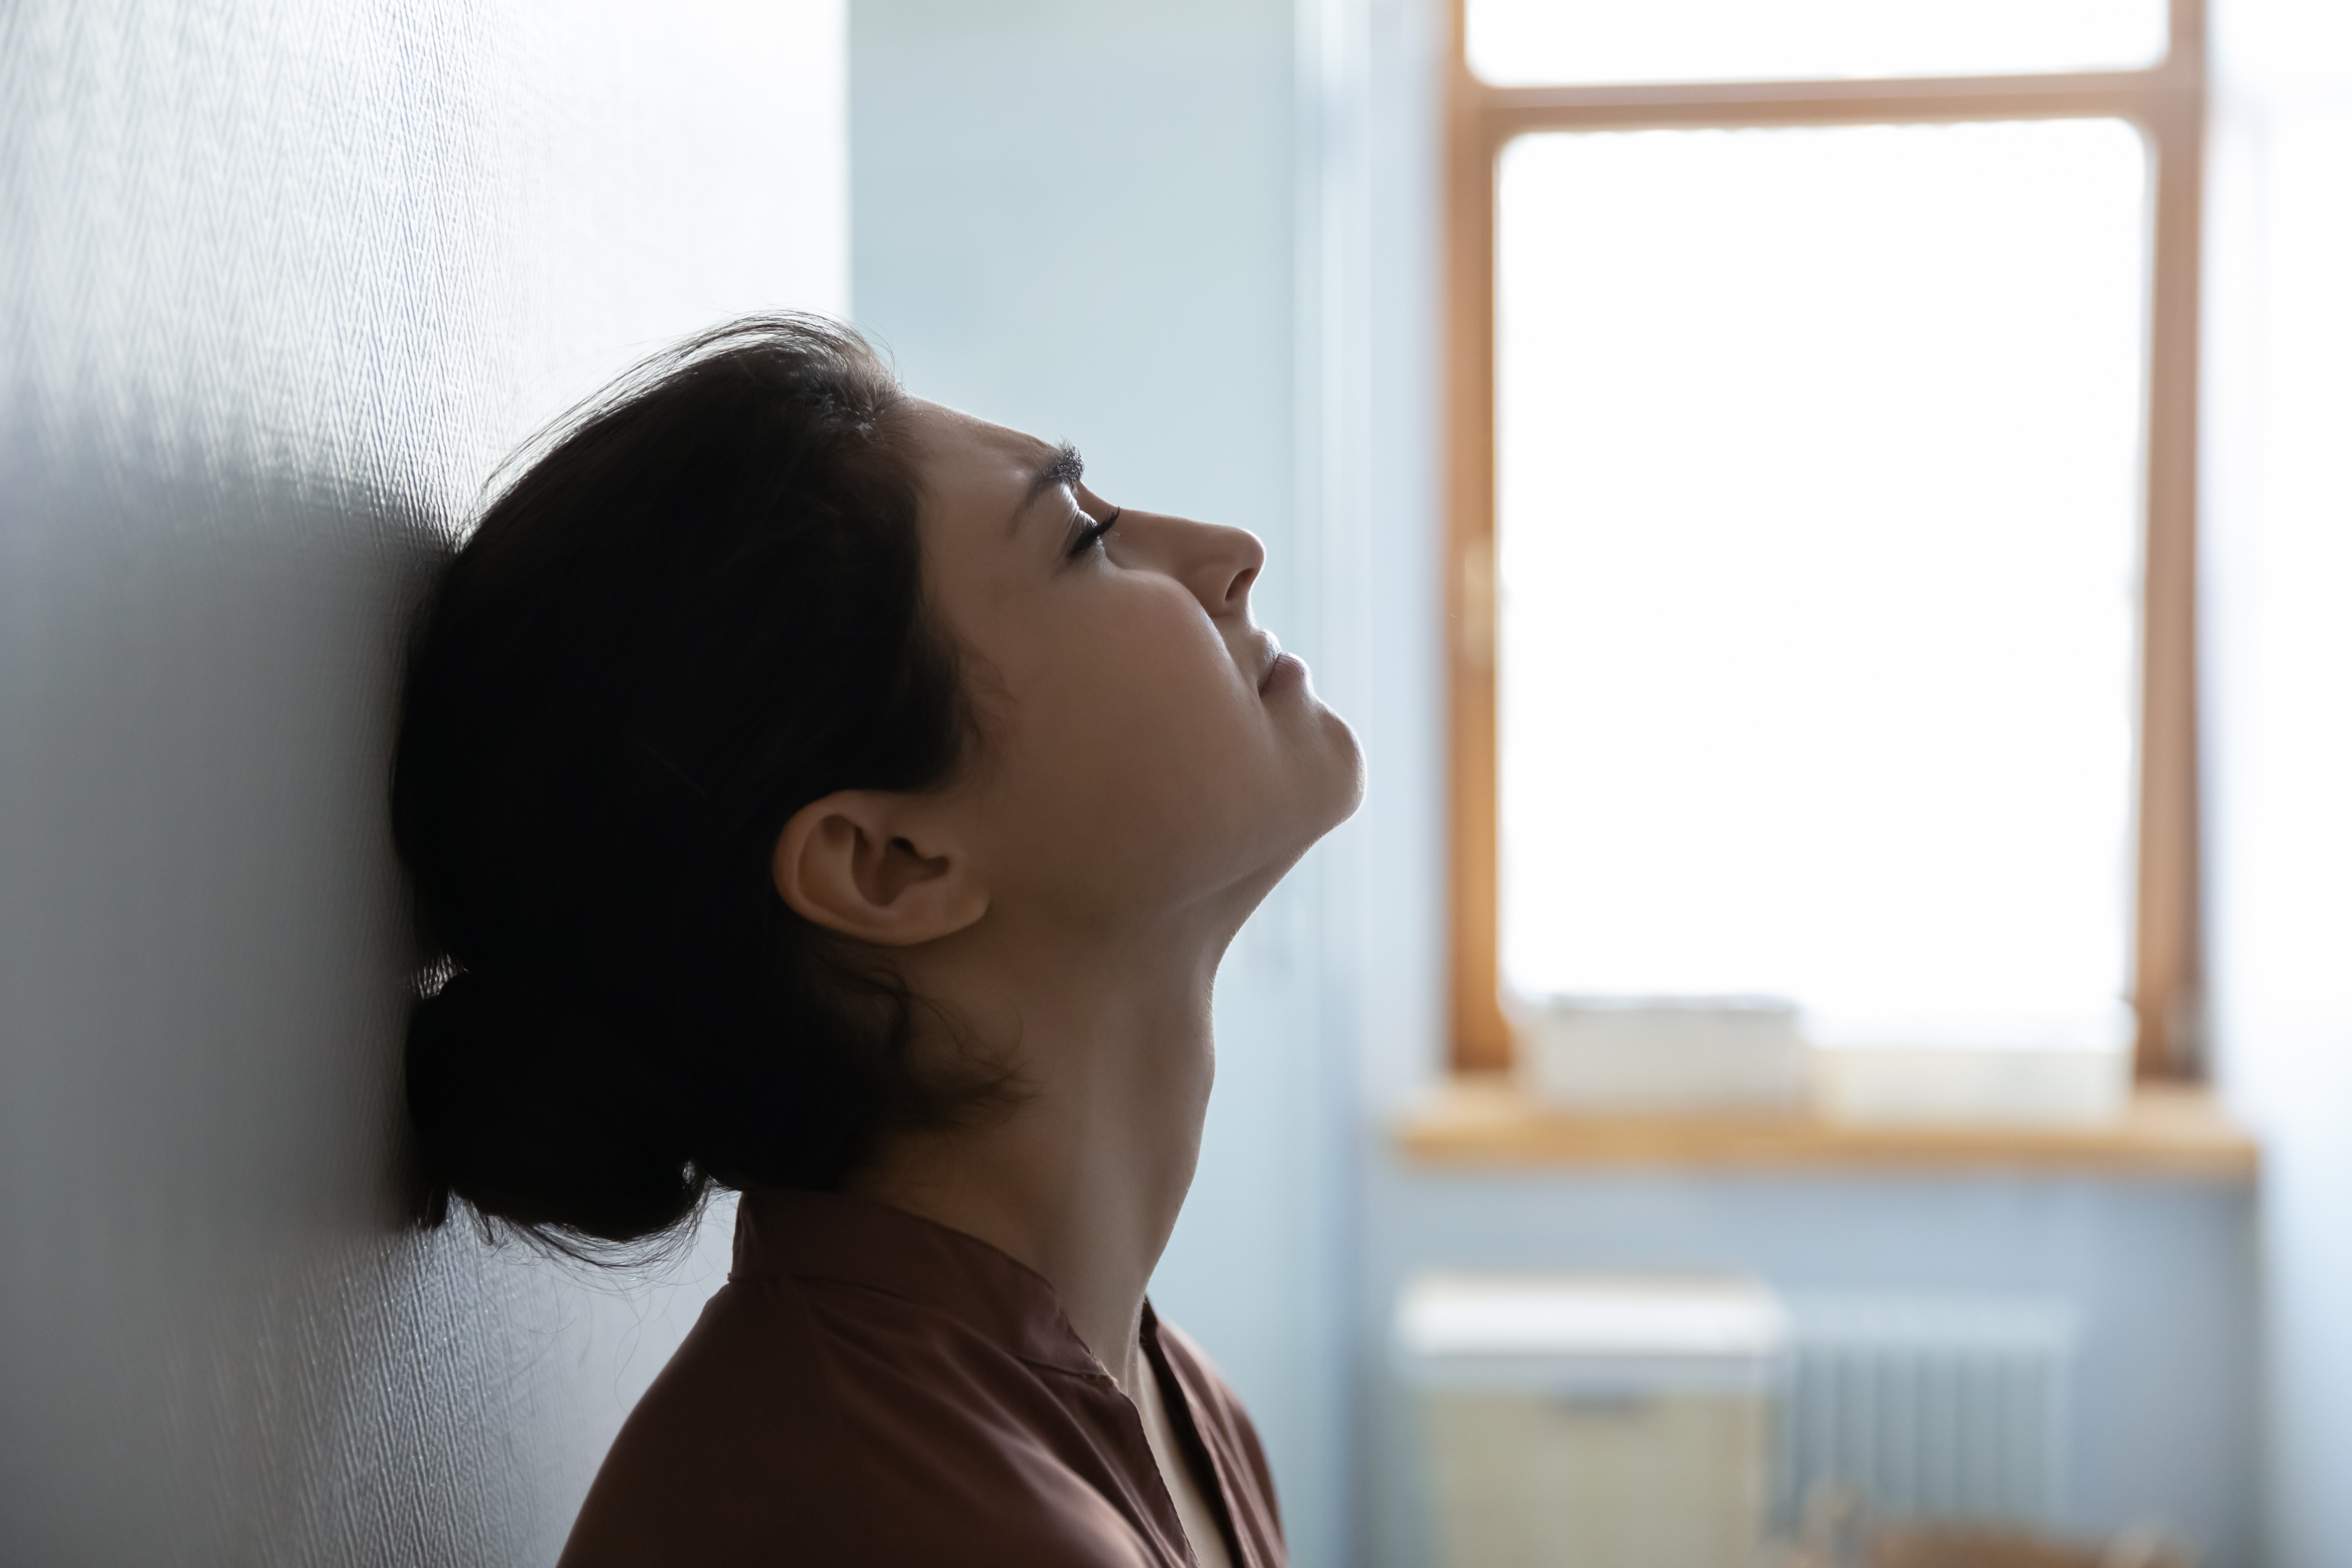 Nervous woman is waiting in hospital wall | Source: Shutterstock.com